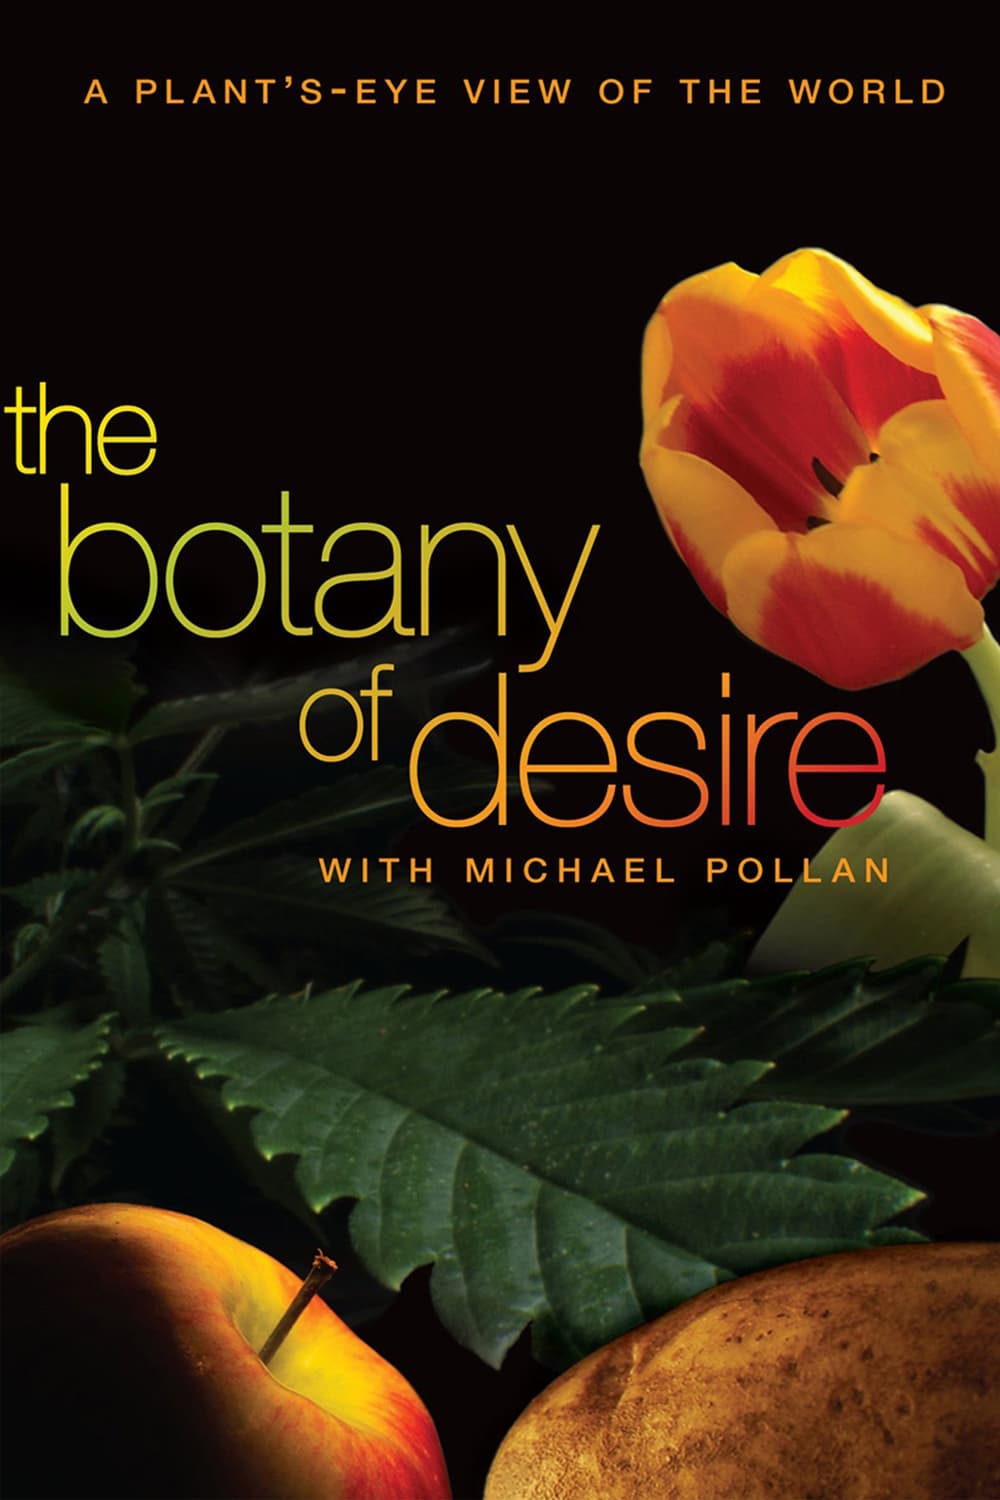 The movie poster for "The Botany of Desire". Flowers and food are in the background.